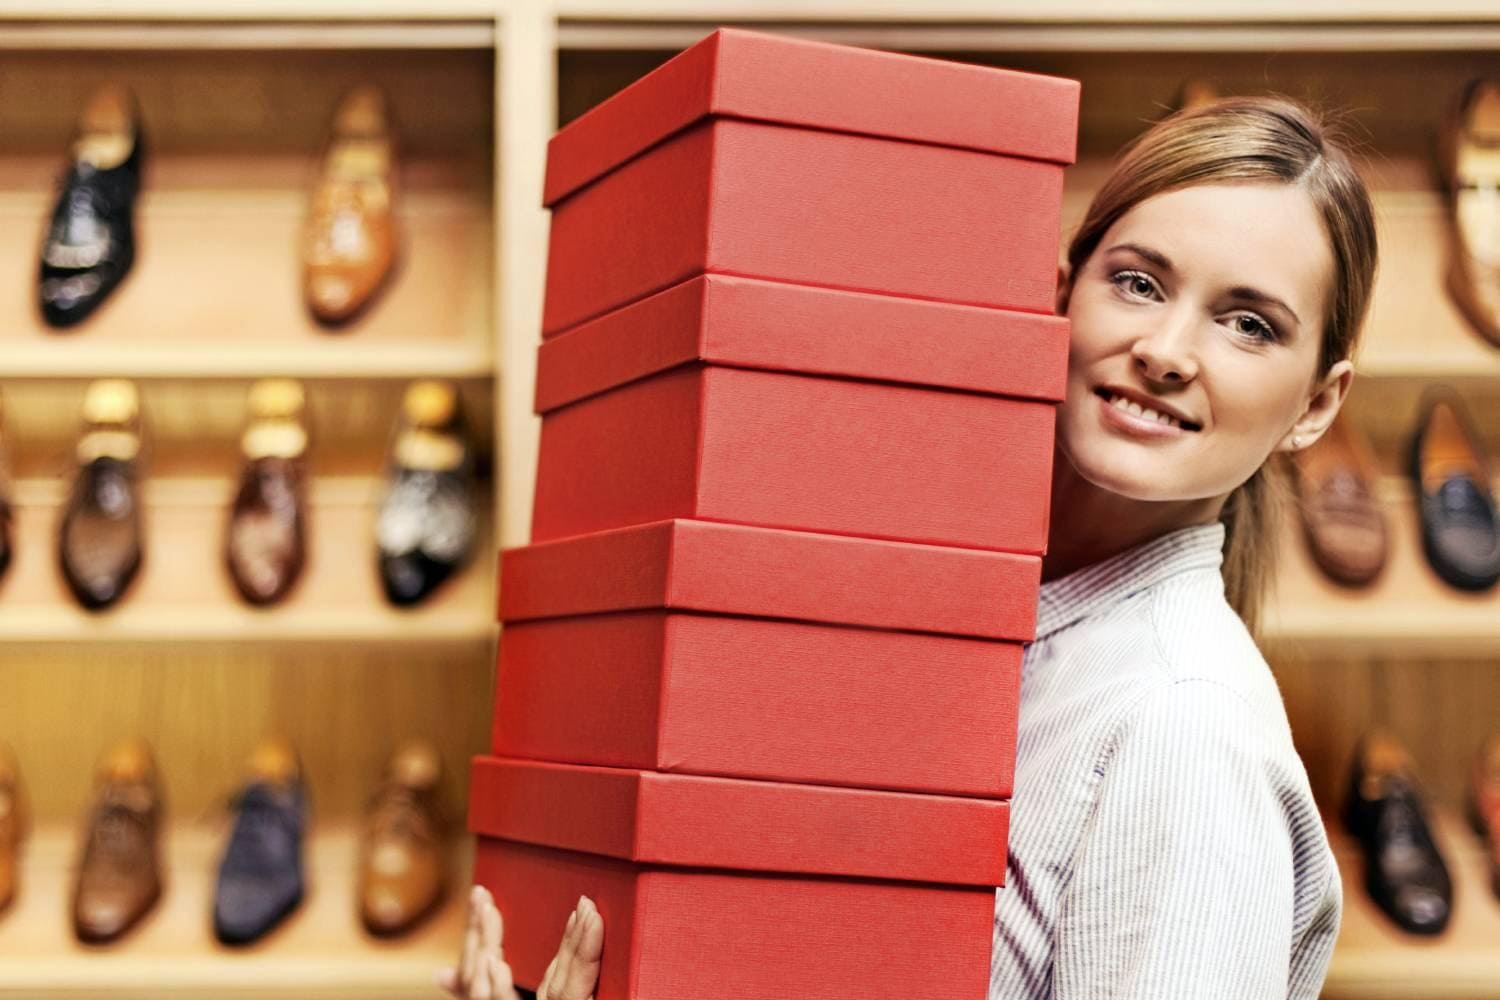 Woman in shoe store holding boxes